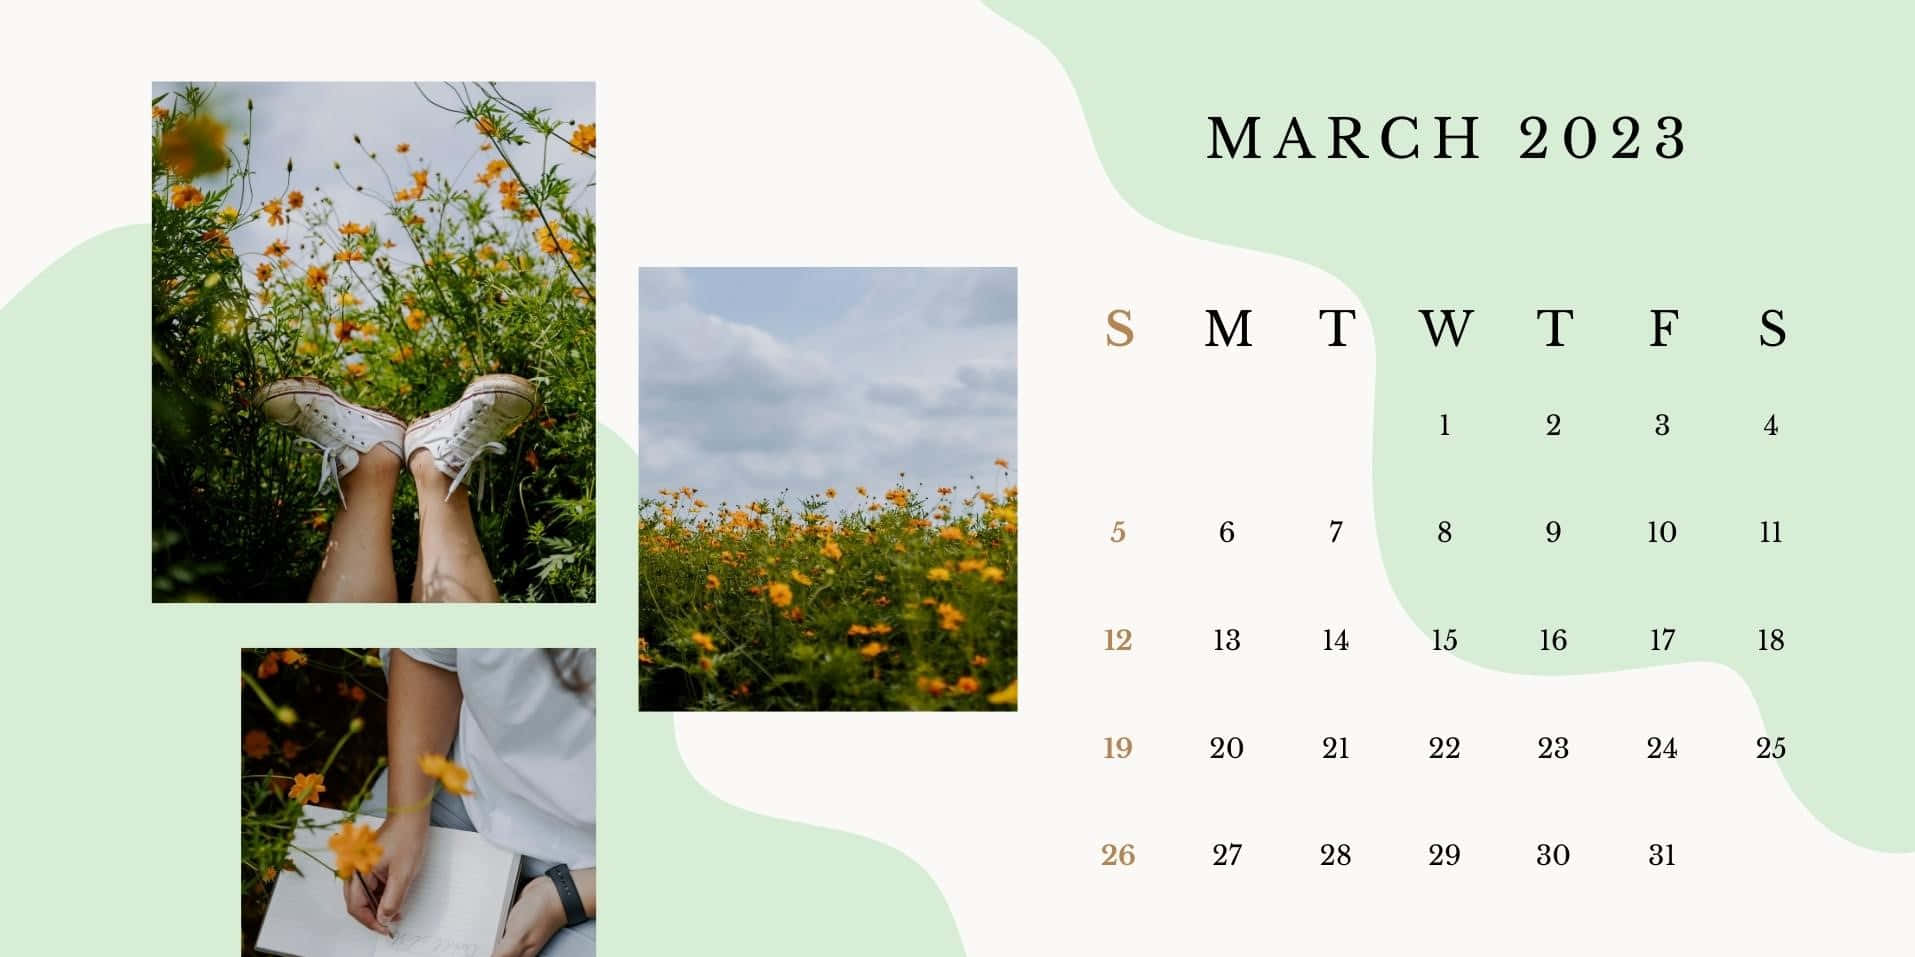 Enjoy the beauty of springtime with this gorgeous March background